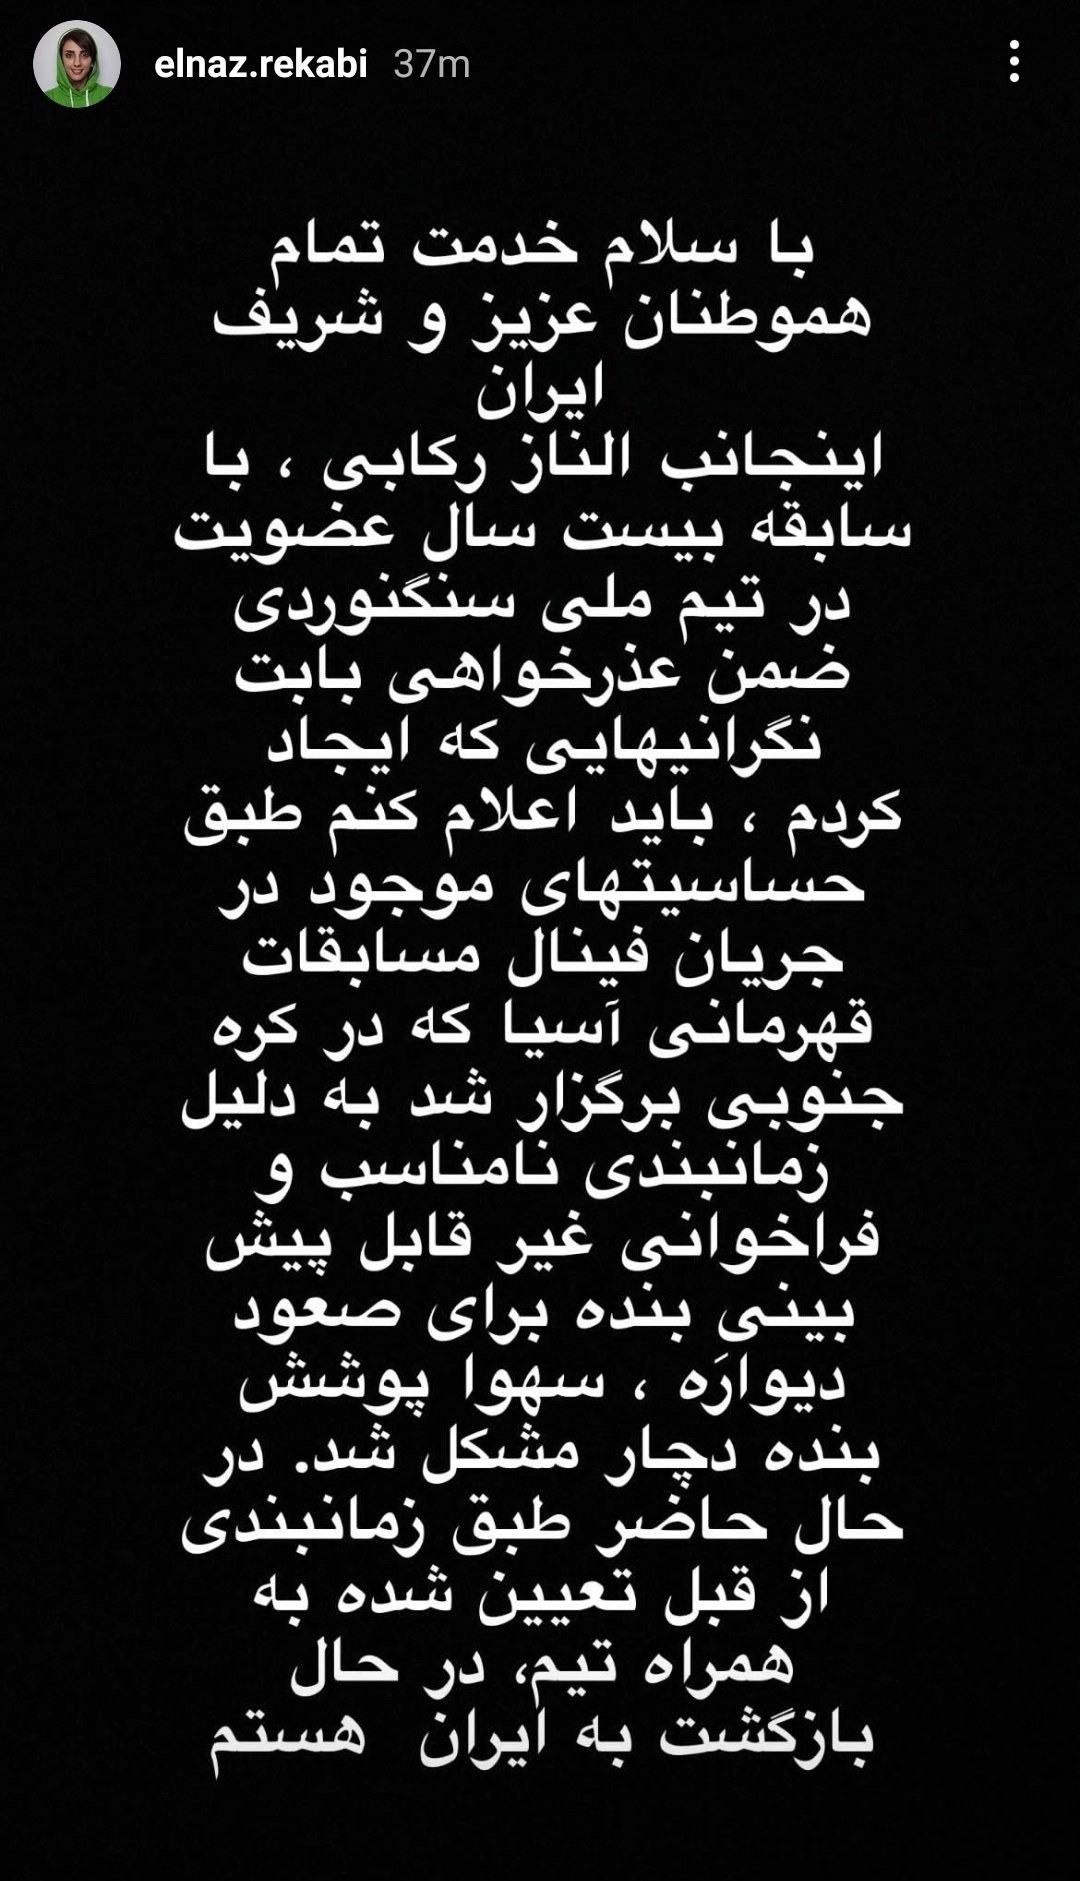 An Instagram story attributed to Elnaz Rekabi&#x27;s account shows a paragraph of text